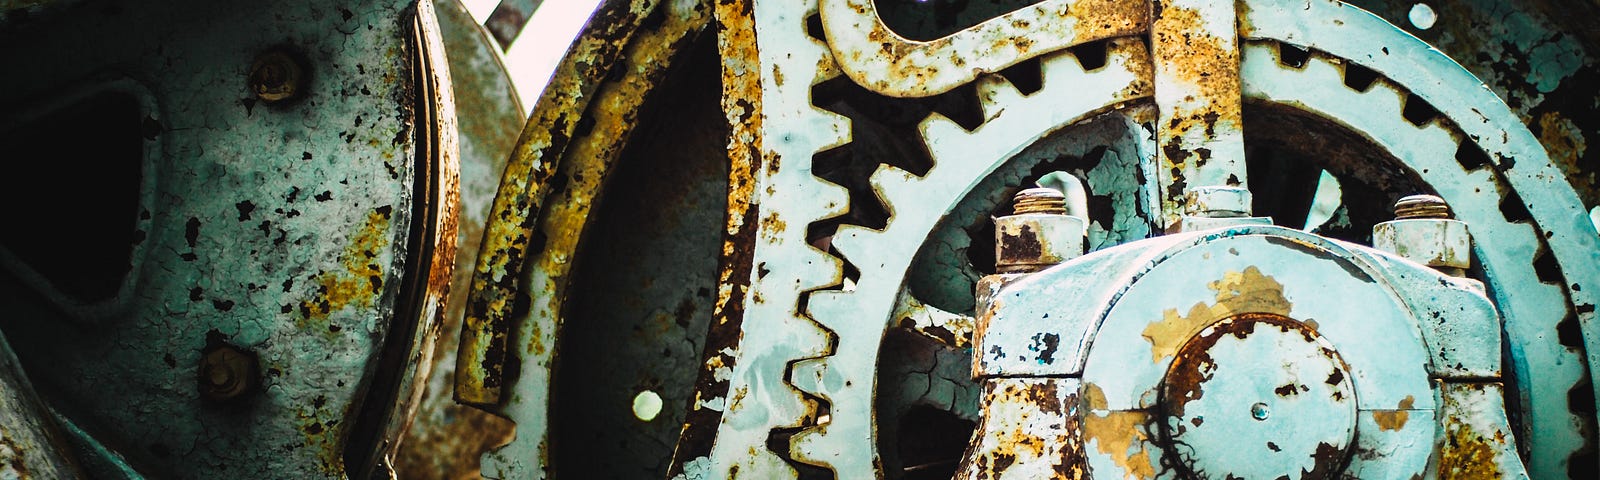 Close-up of rusted gears